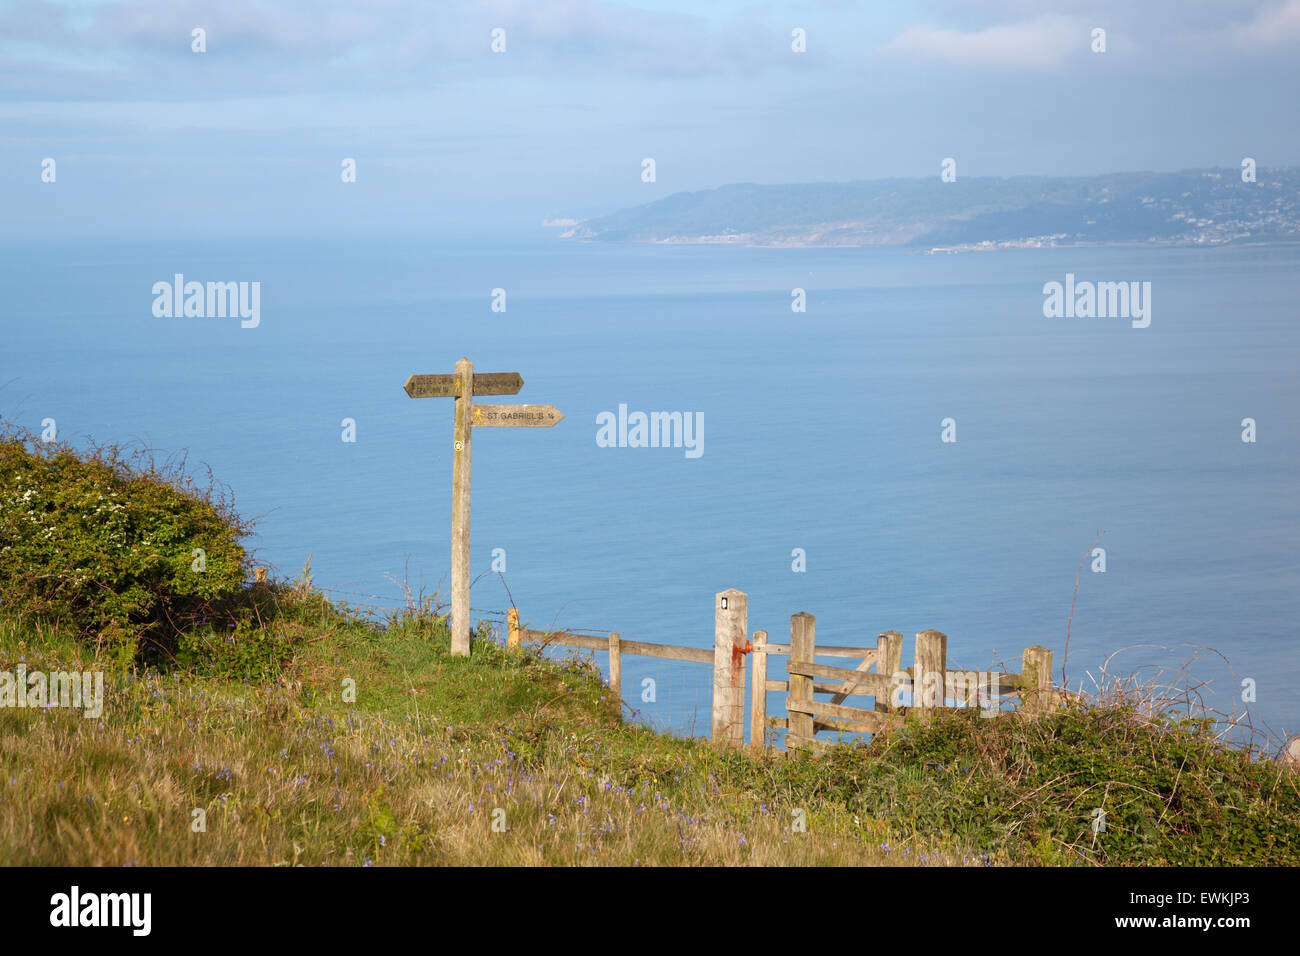 Signpost and Kissing Gate on the South West Coast Path, overlooking Lyme Bay. Dorset. England. UK. Stock Photo